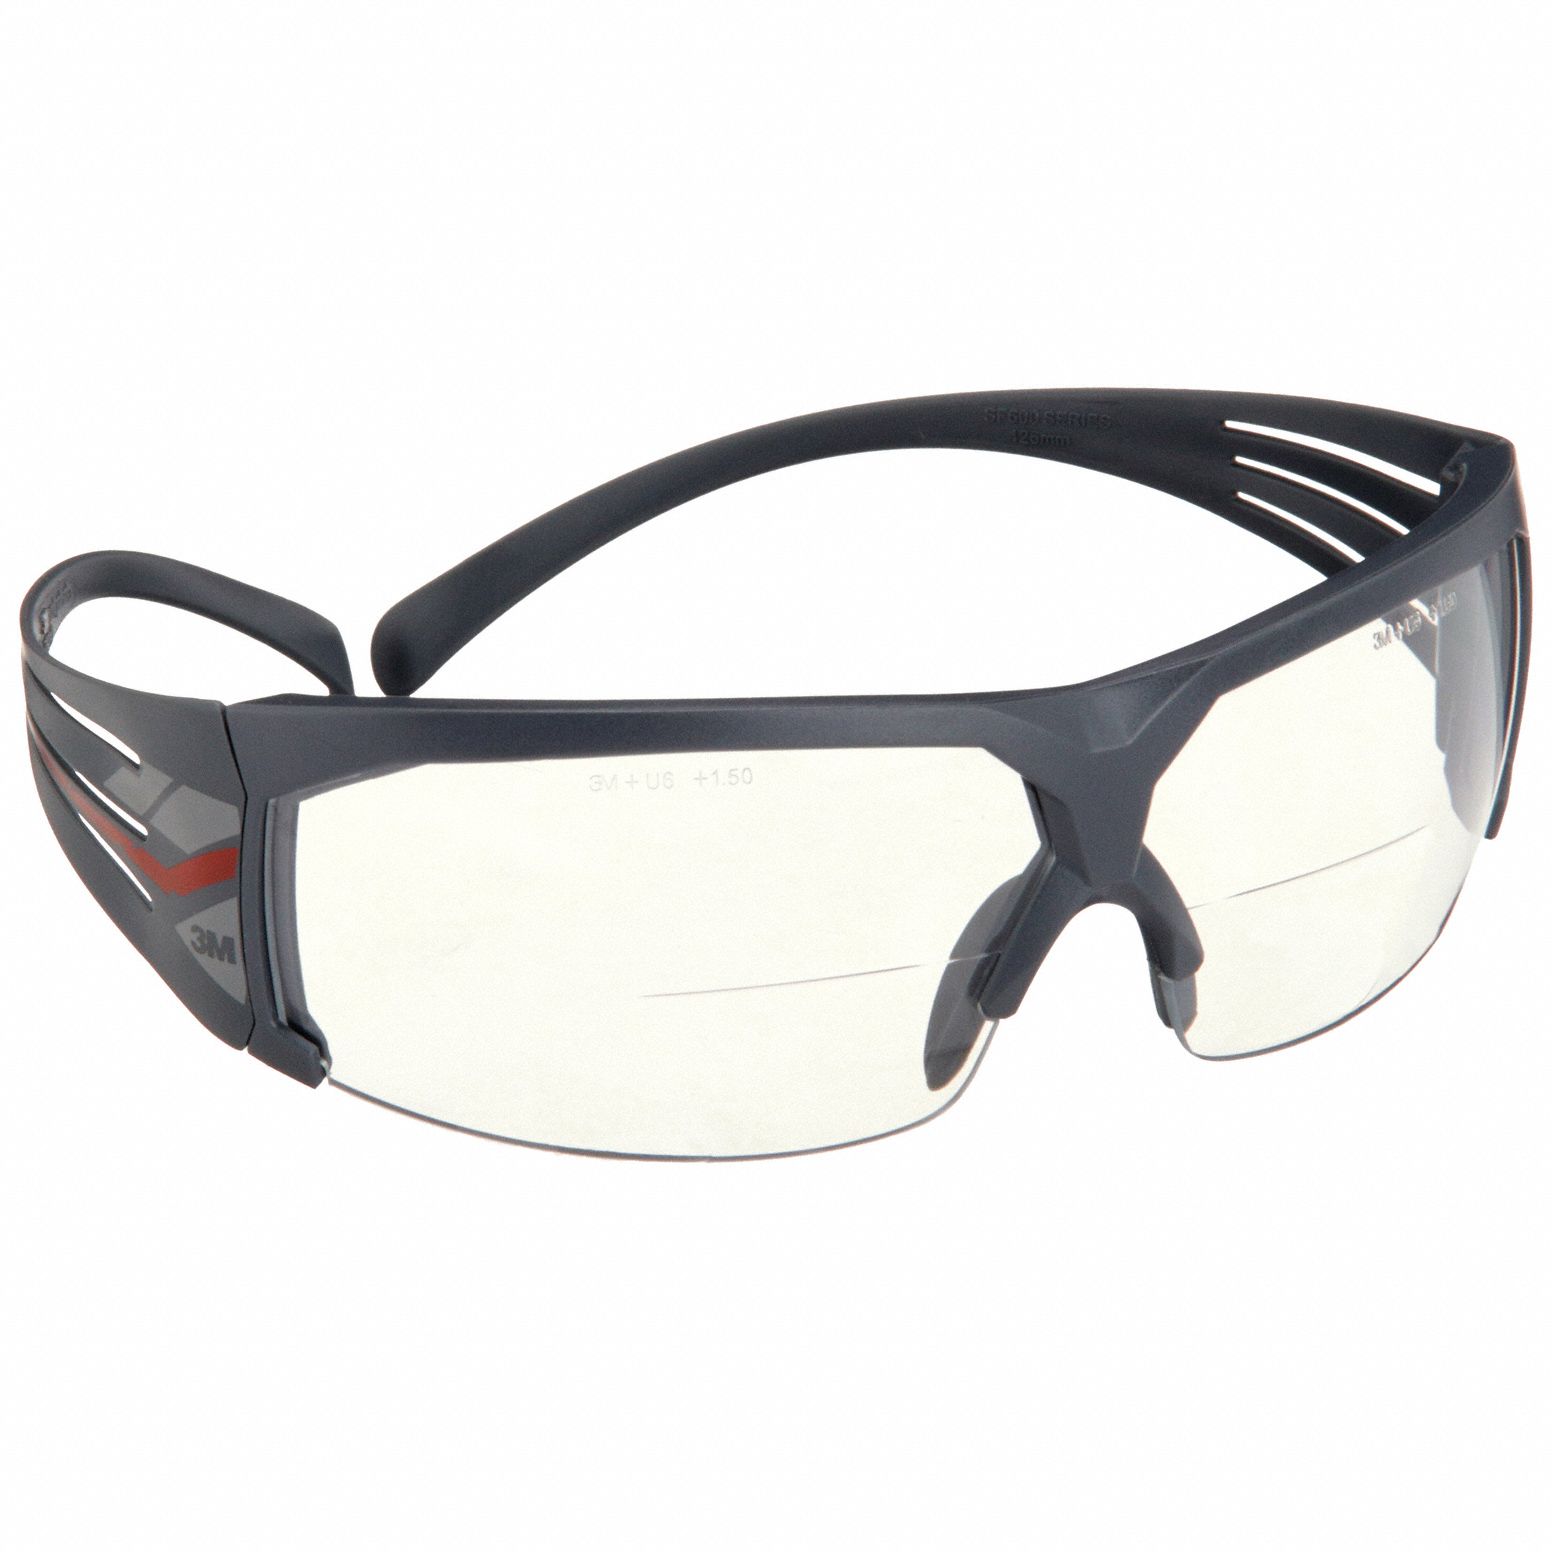 Safety Glasses, Anti-fog, Scratch-resistant, Anti-static, Uv, Diopter